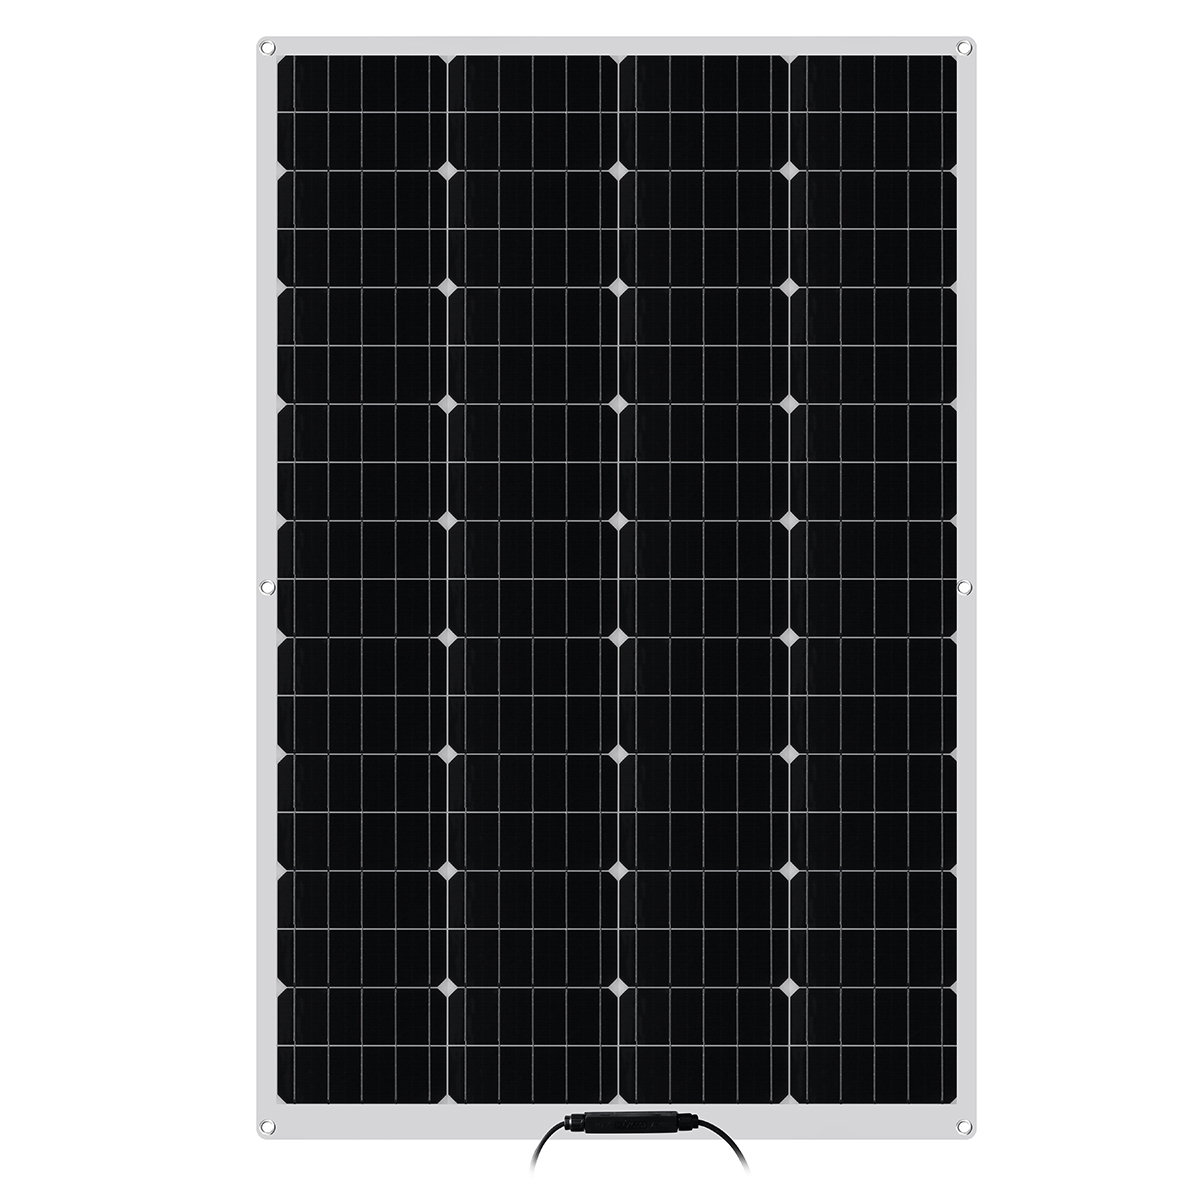 100W-18V-Flexible-Solar-Panel-Battery-Power-Charge-Kit-For-RV-Car-Boat-Camping-1717562-3